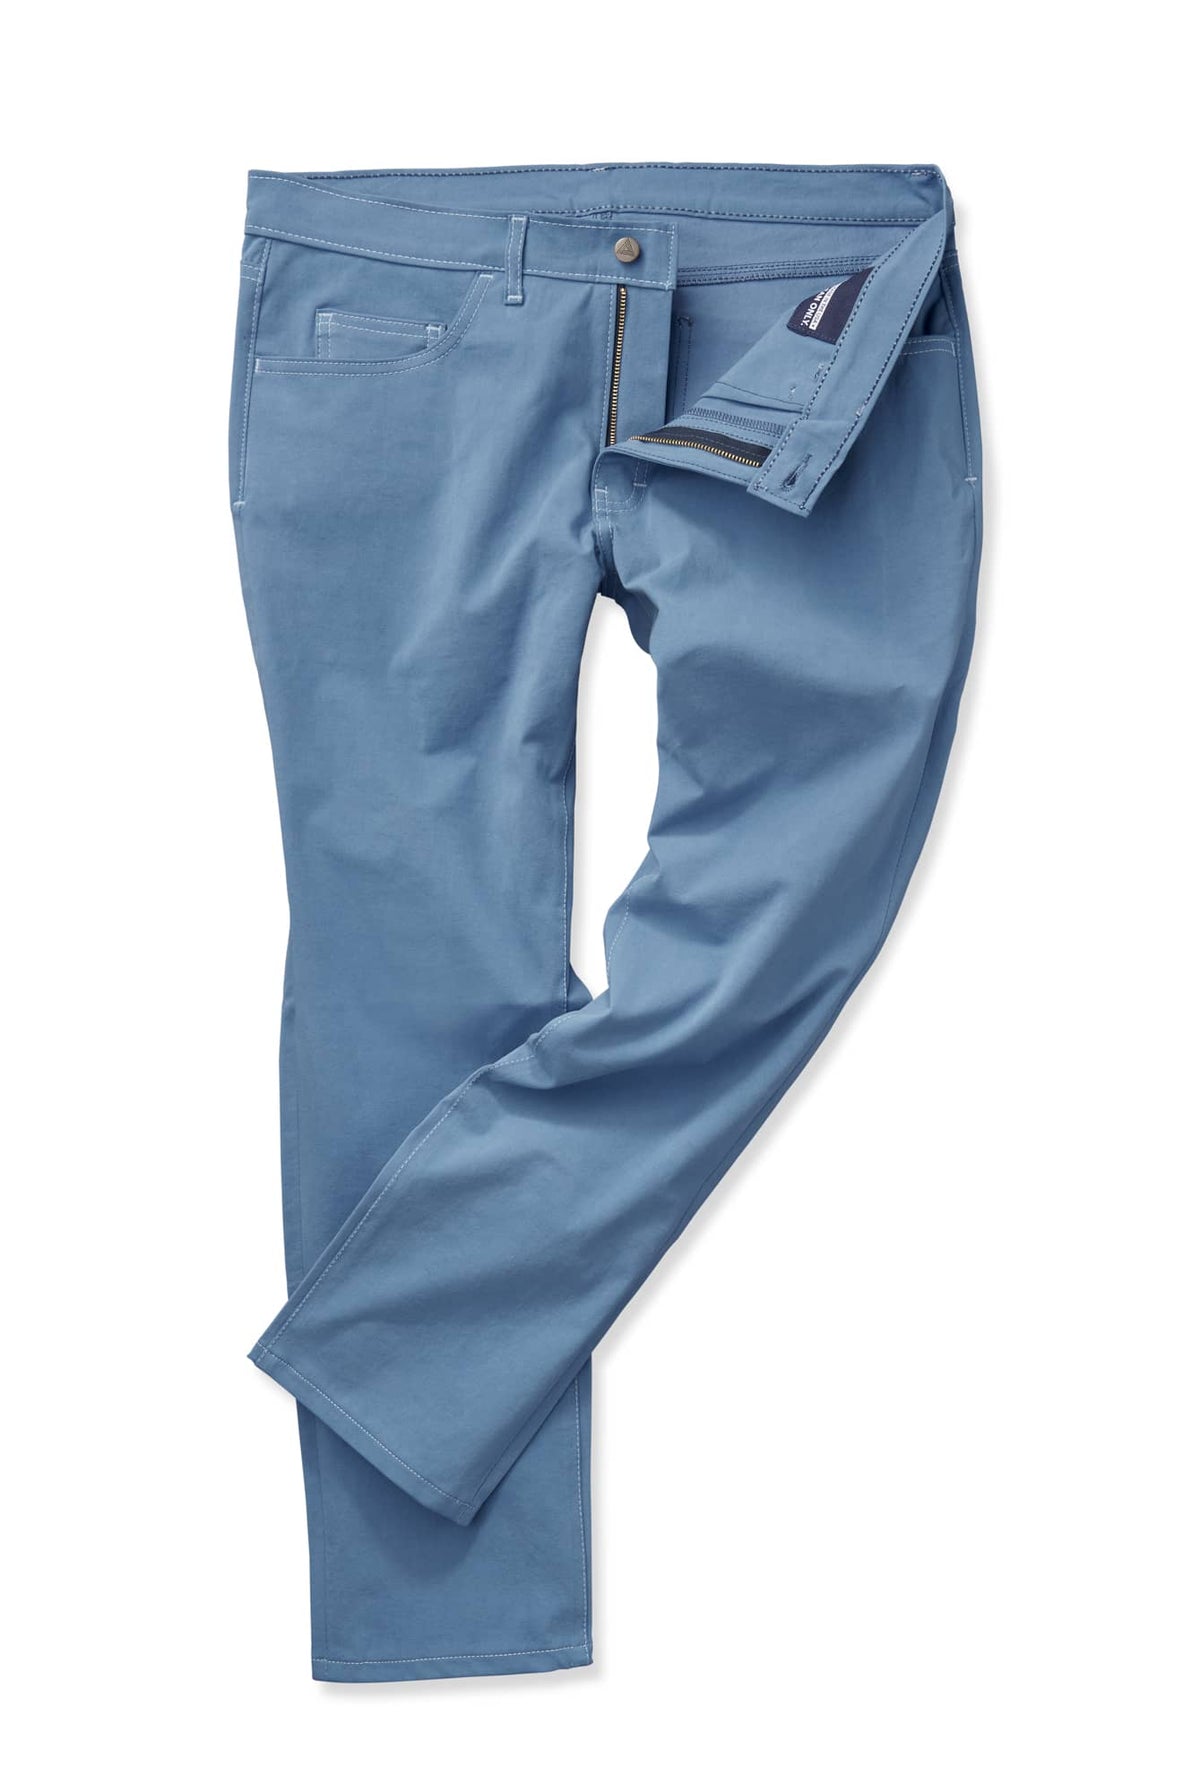 Celio Men Blue Solid Slim Fit Cotton Basic Chinos Casual Trousers